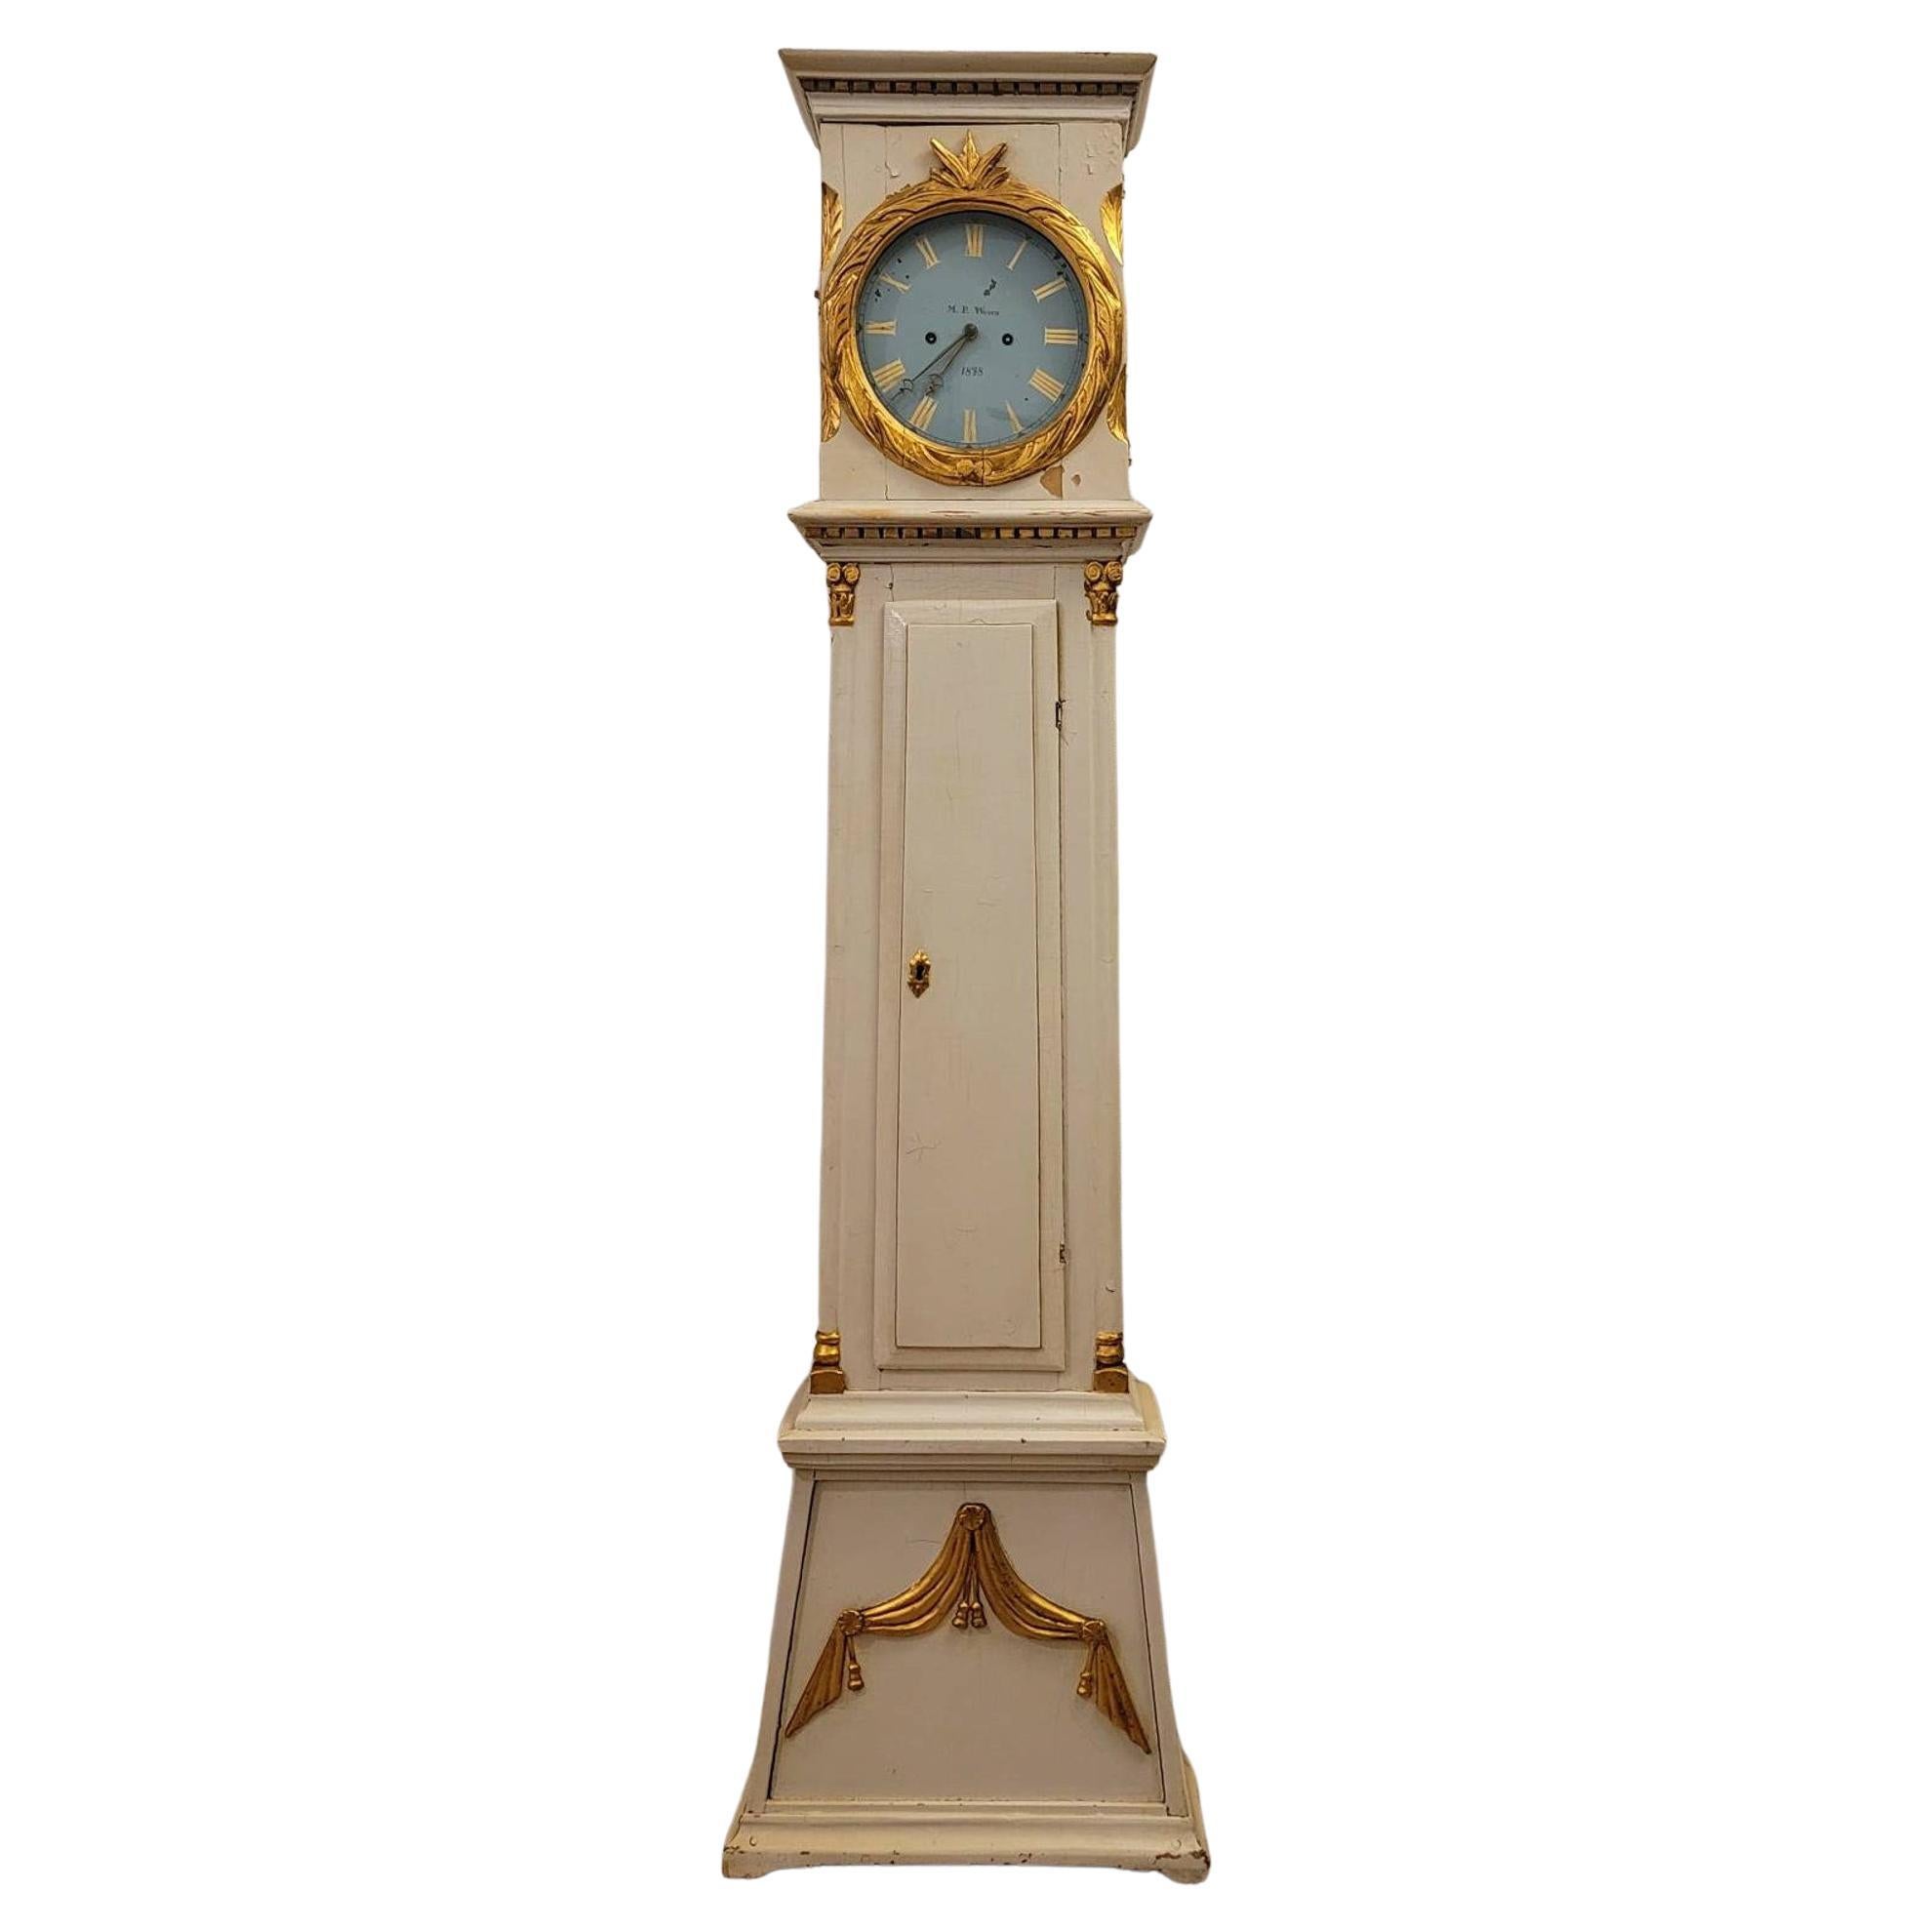 19th Century Bornholm Tall Clock by Mogens Peter M. P. Westh